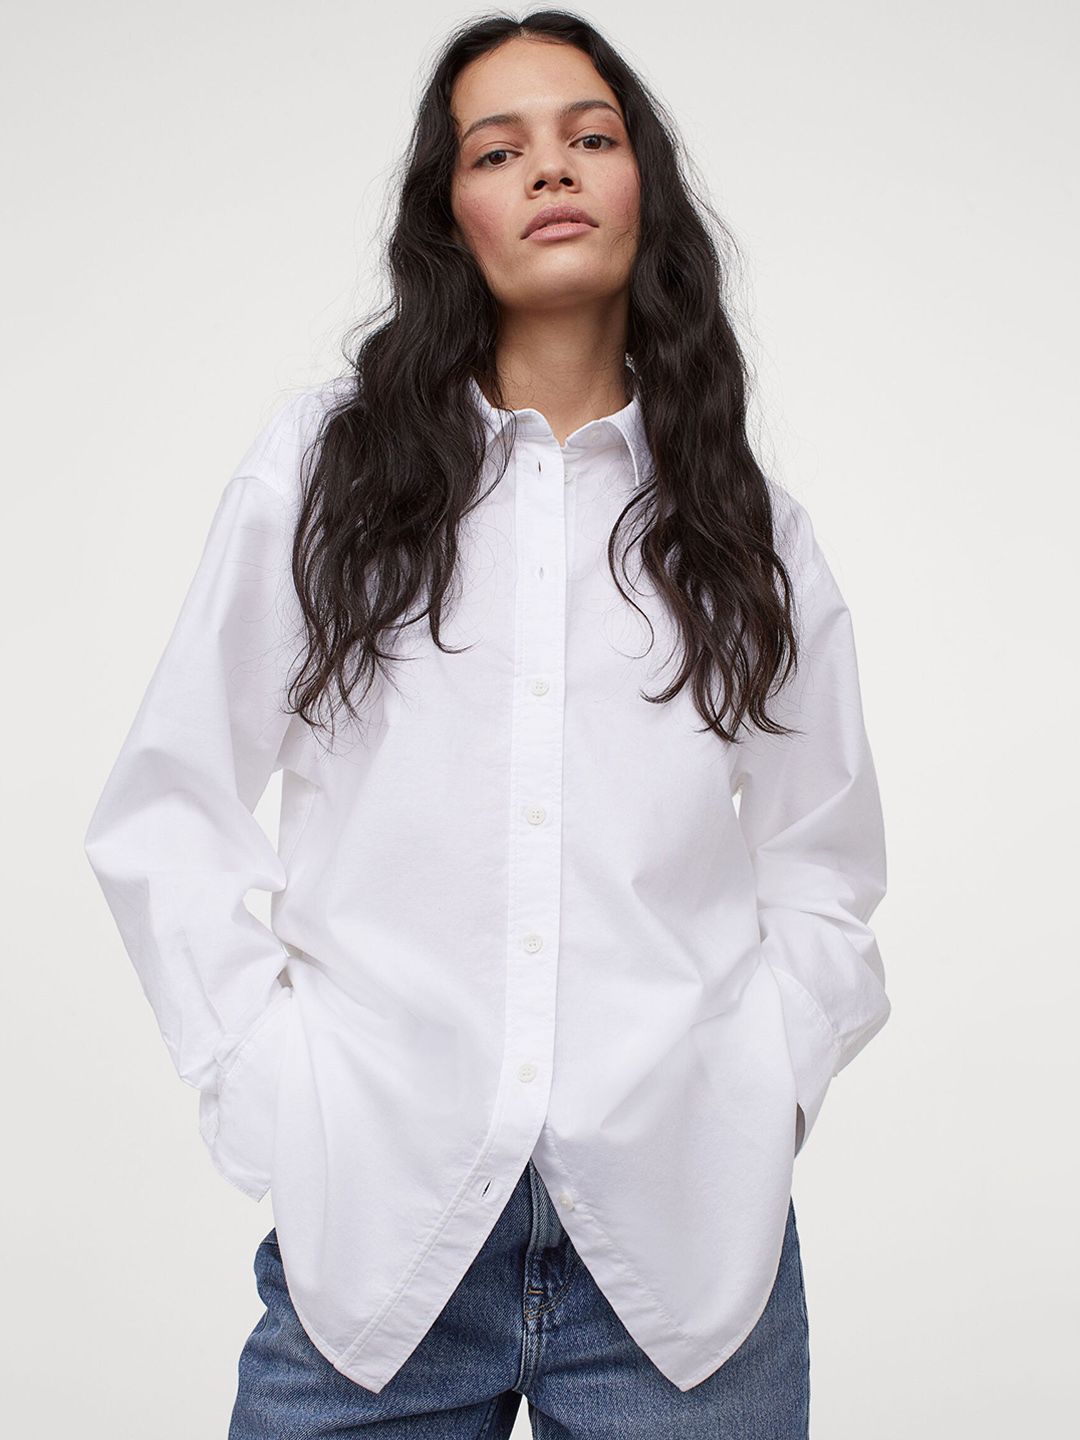 H&M Women White Solid Oversized Oxford Shirt Price in India